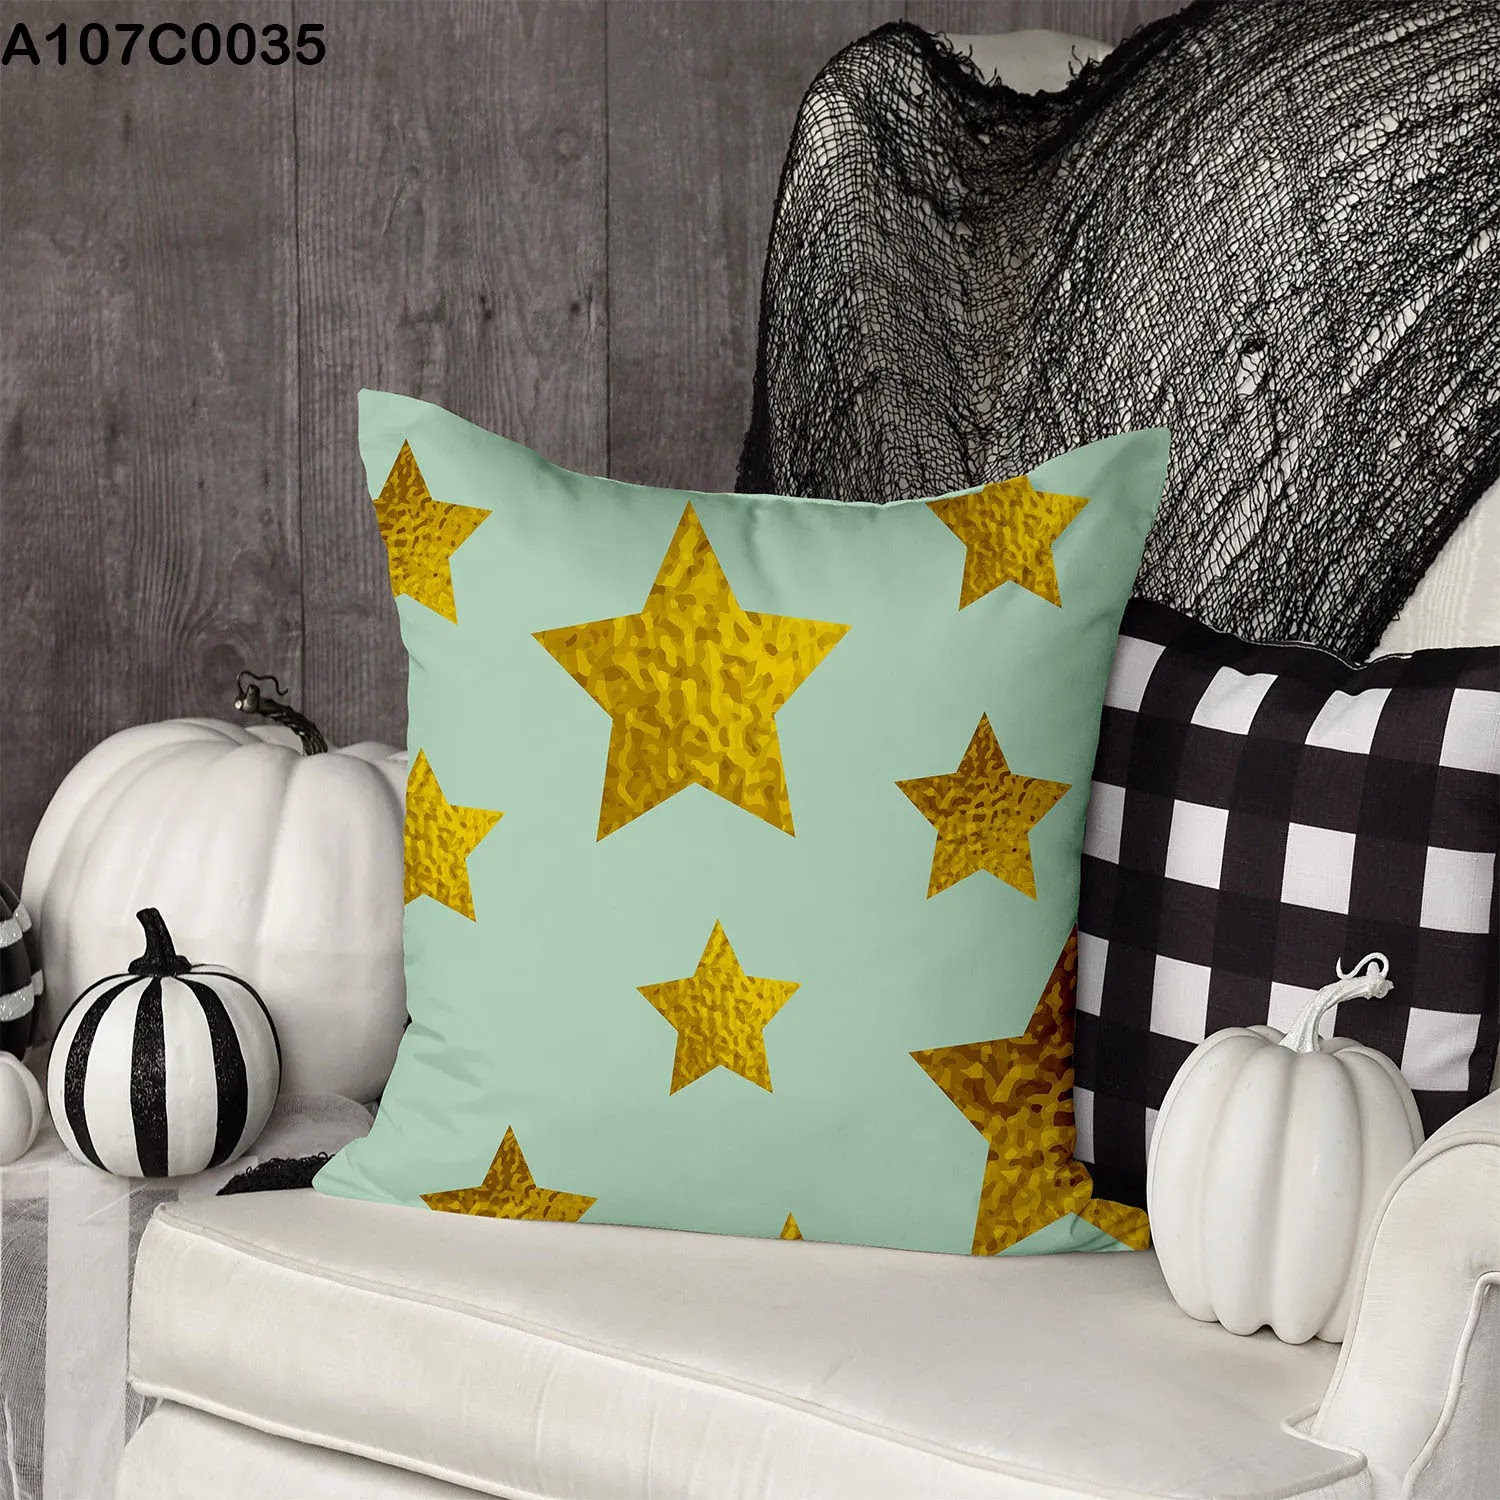 Light green pillow case with gold stars